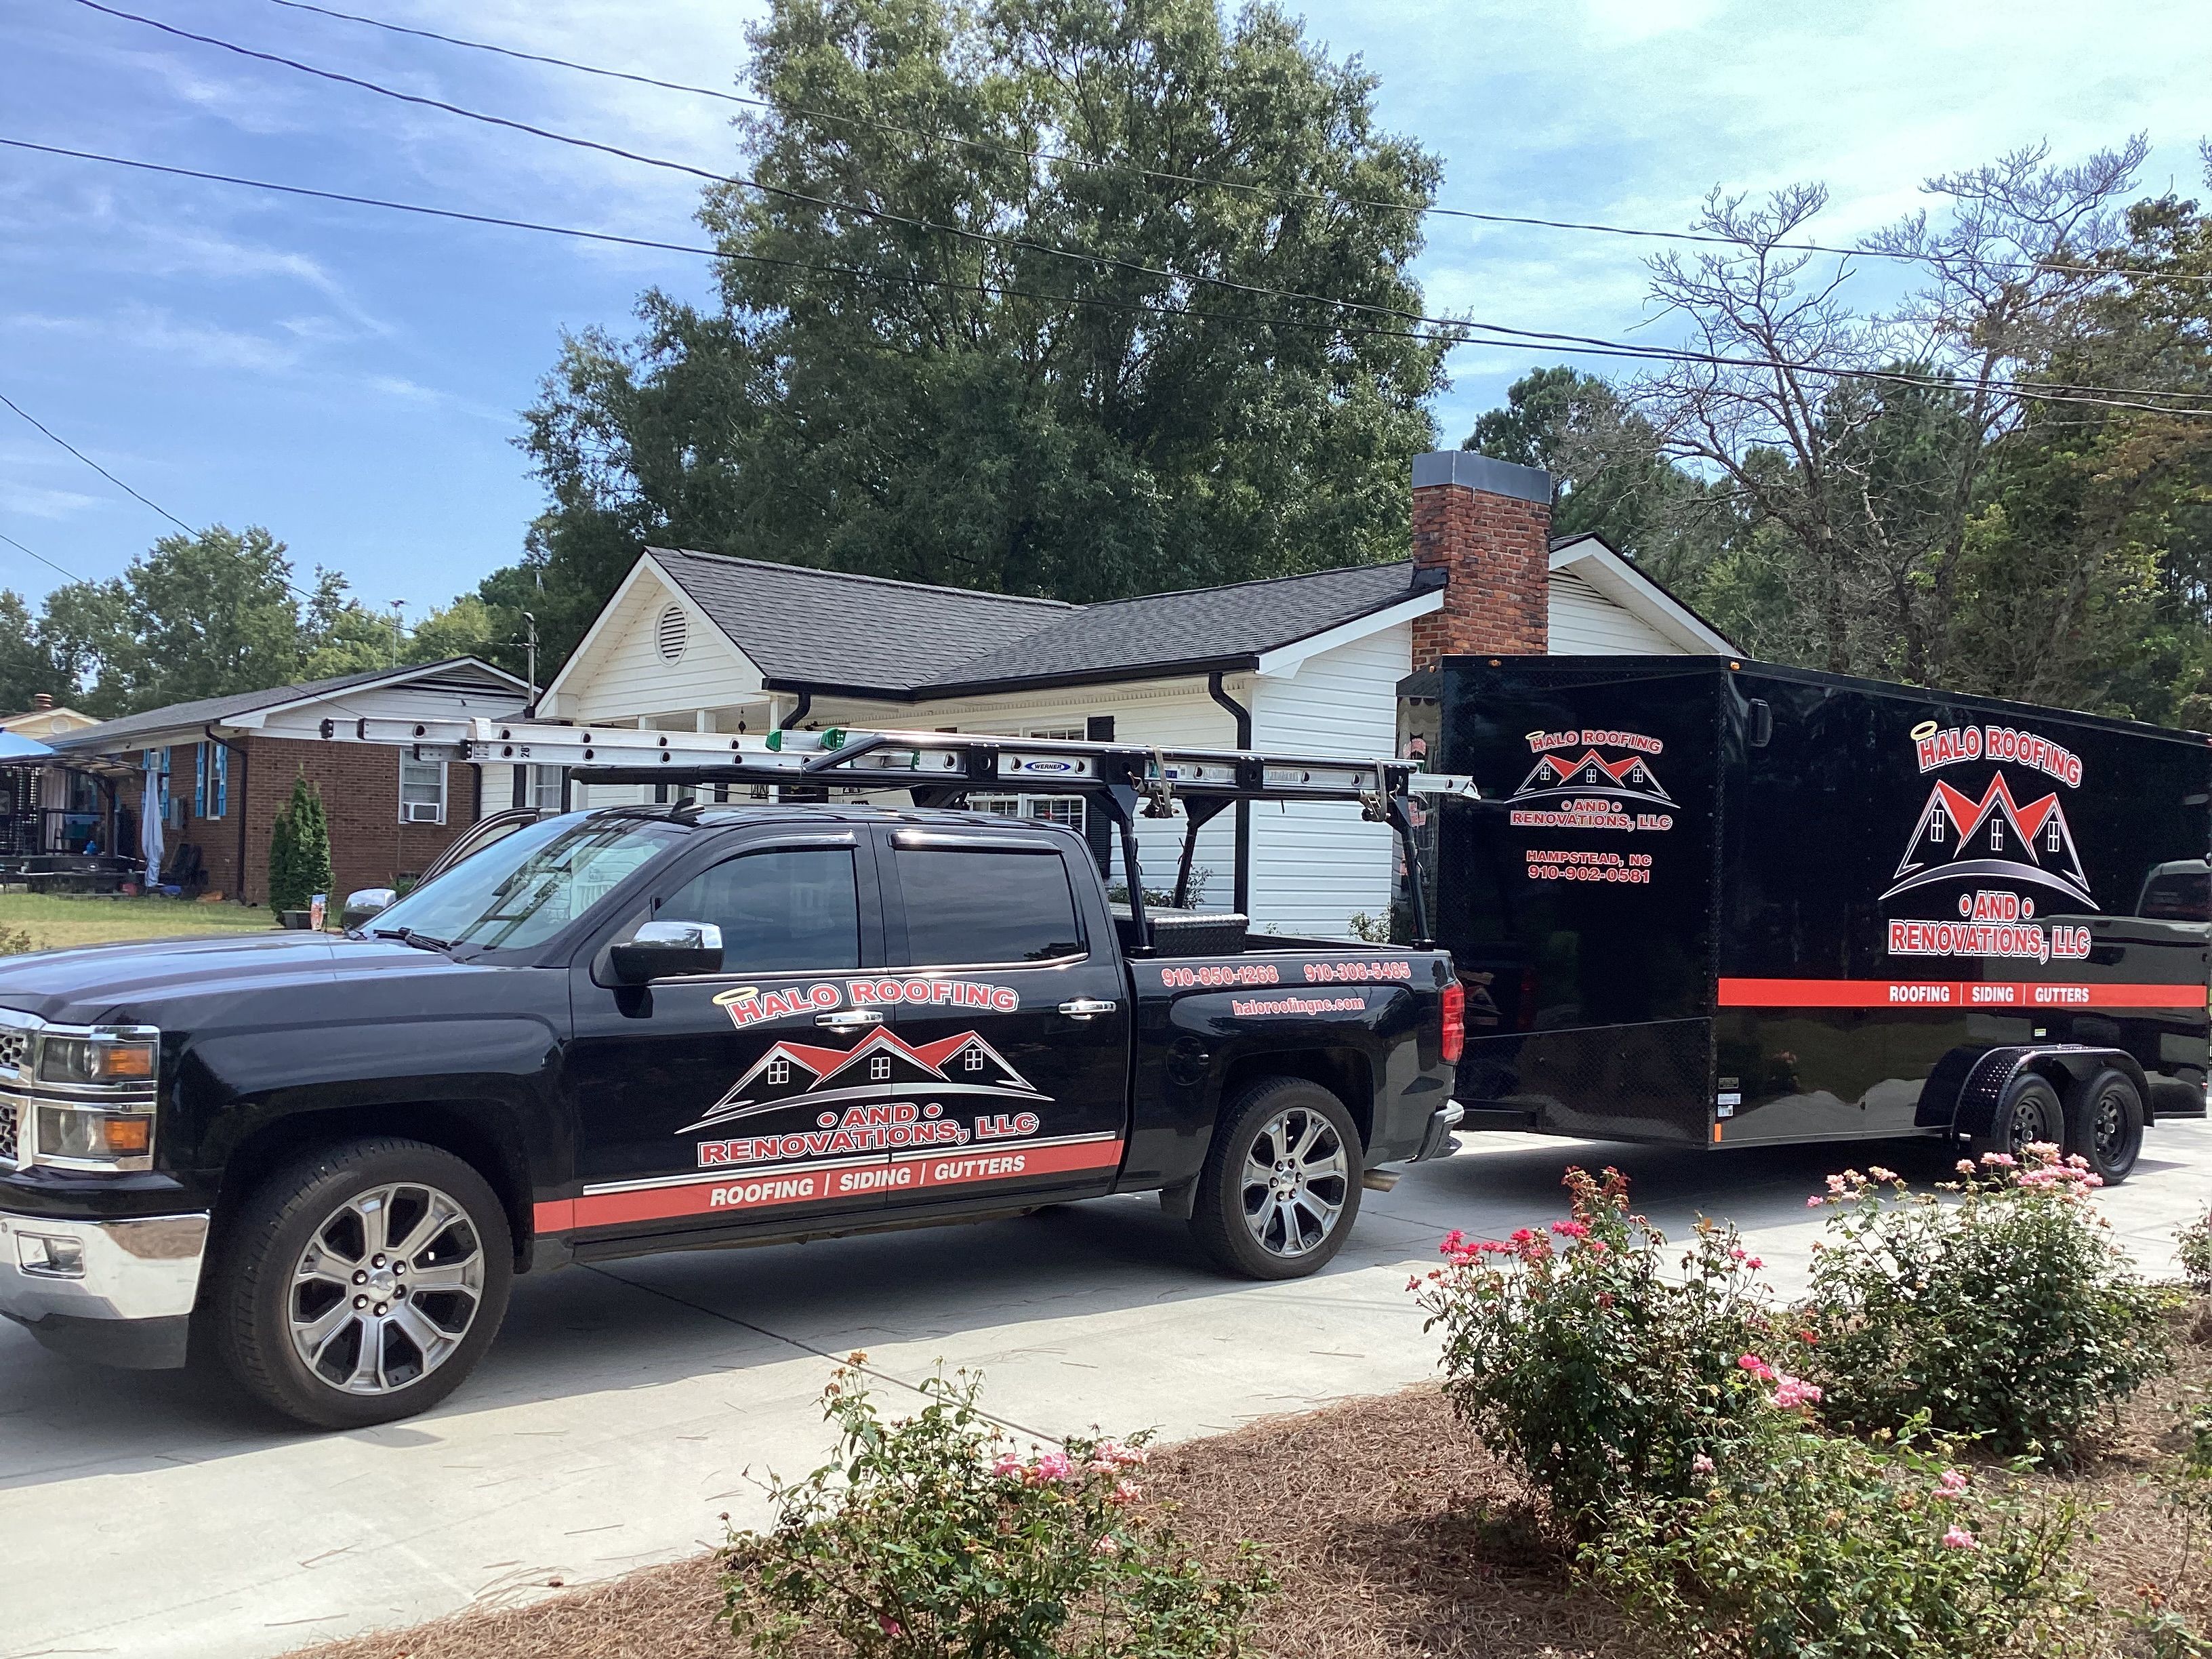 Residential Roof Replacement for Halo Roofing & Renovations in Benson, NC